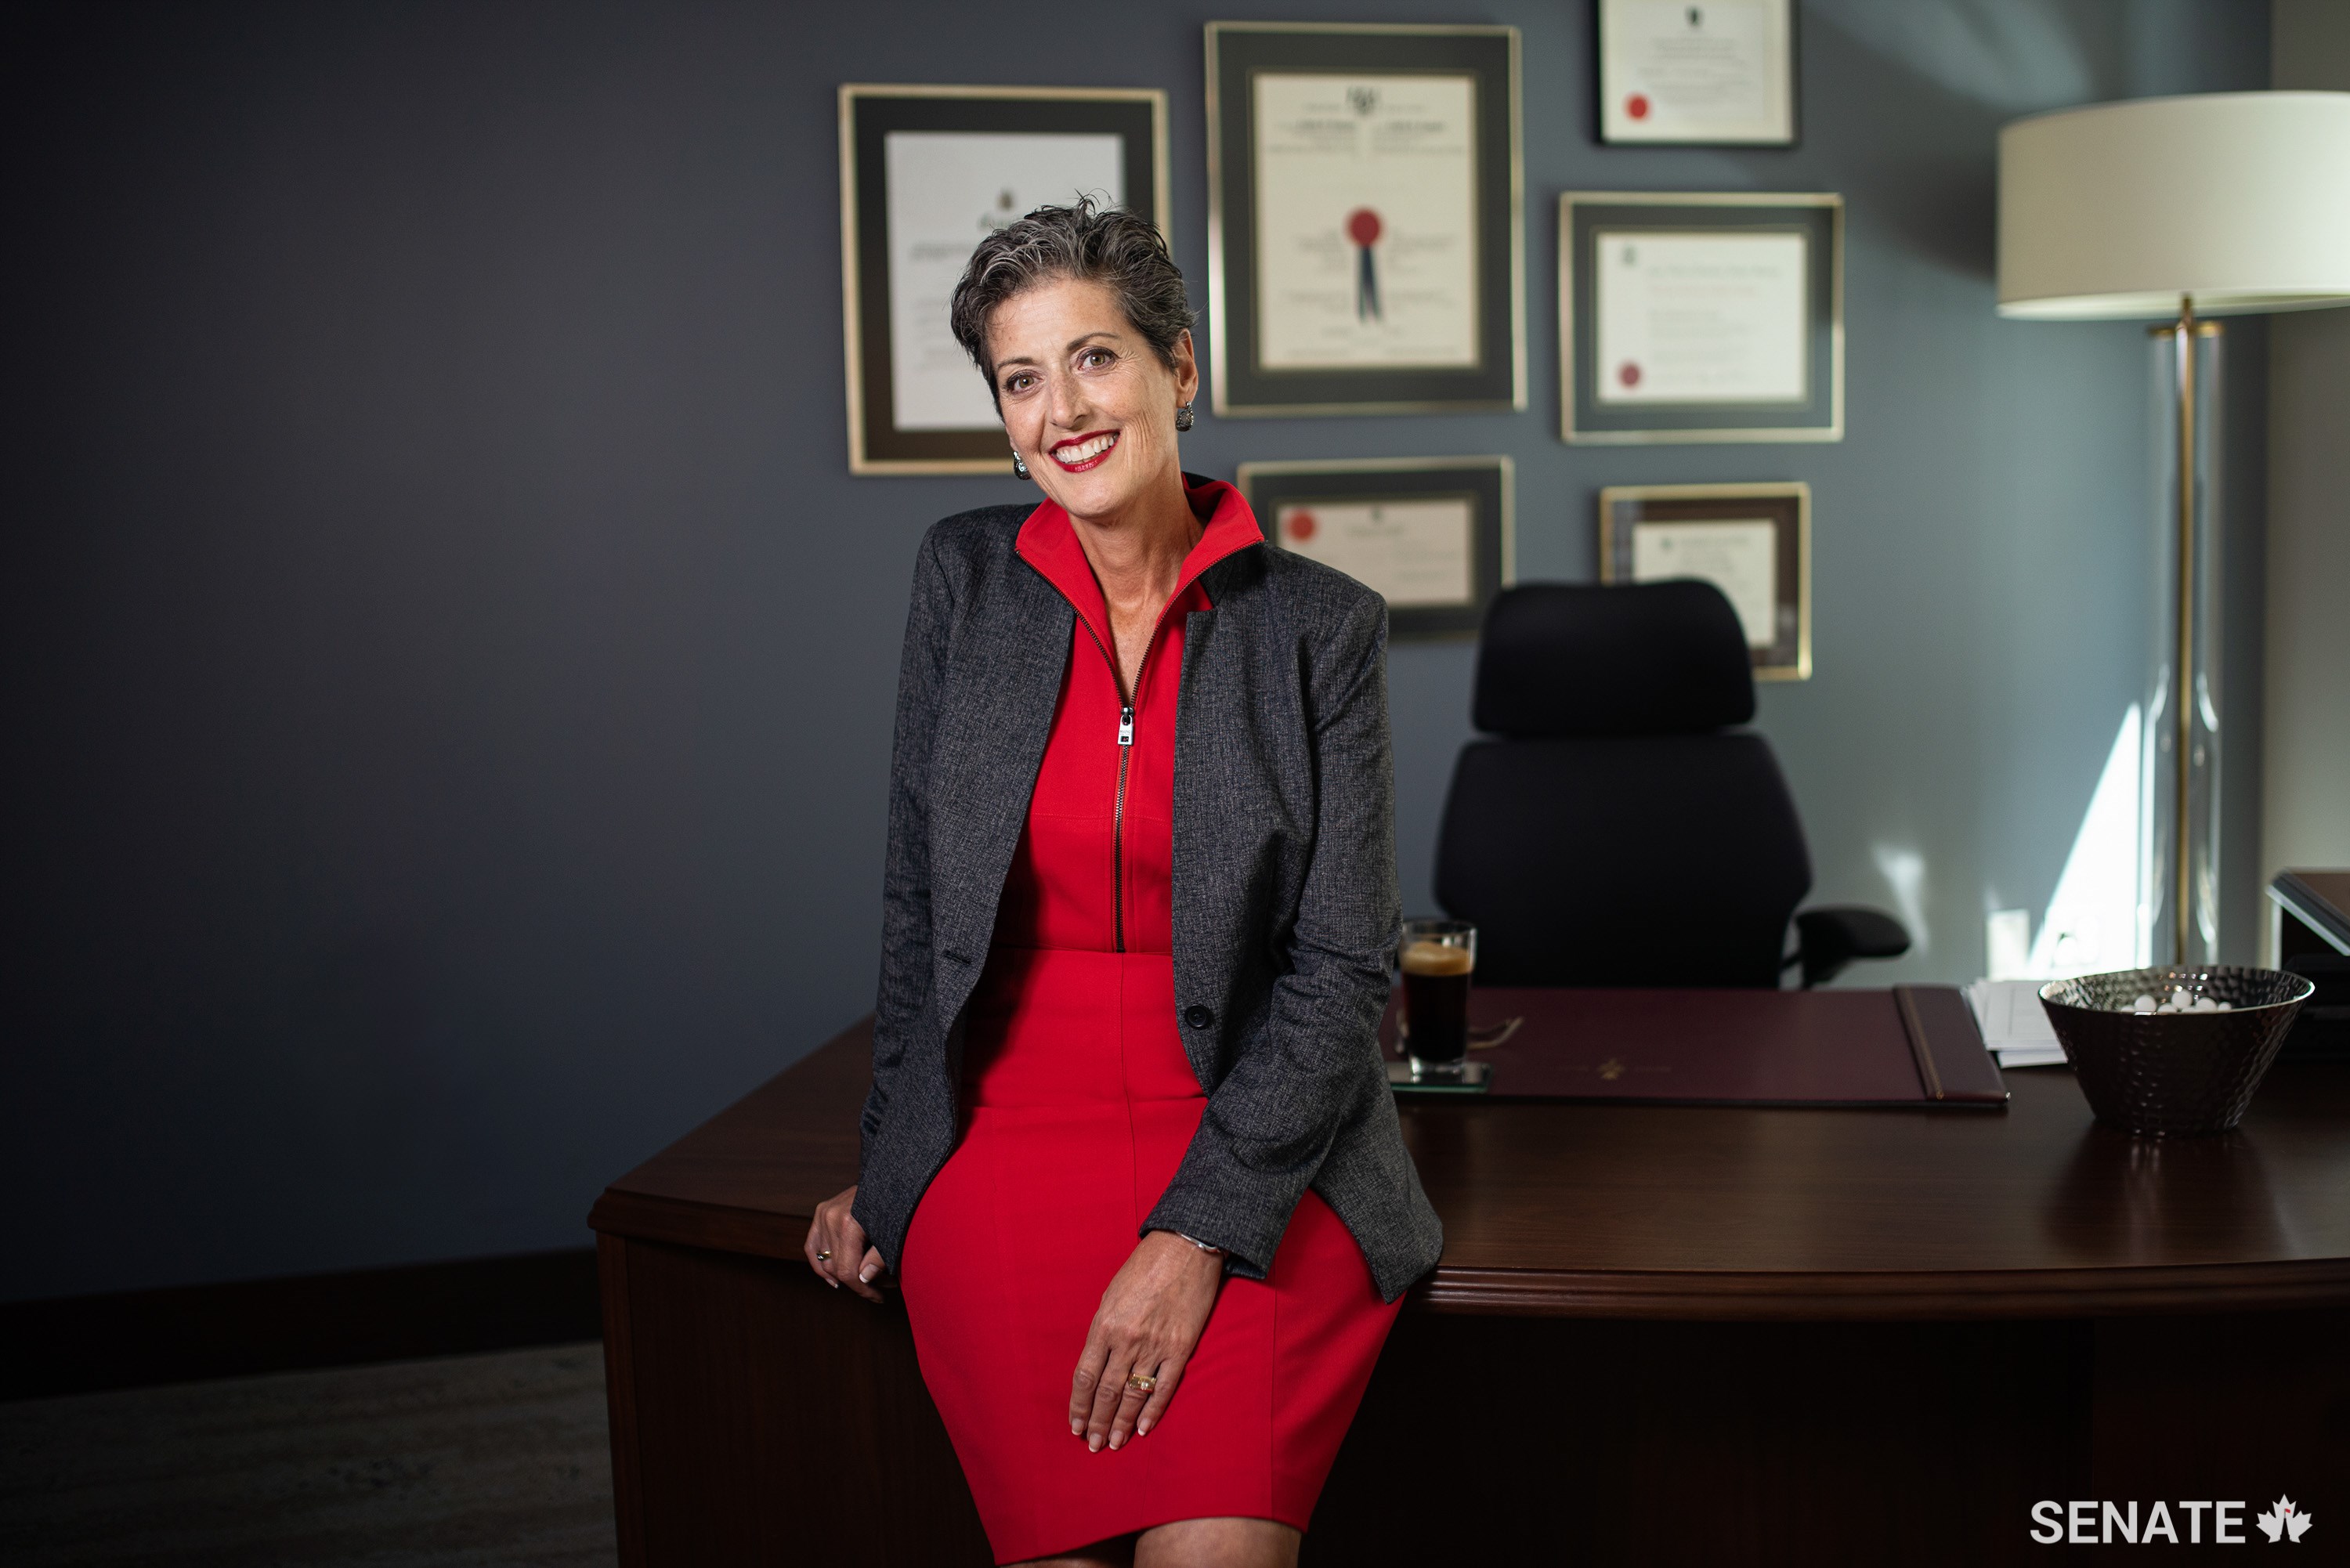 Senator Josée Forest-Niesing was inducted into the University of Ottawa’s Common Law Honour Society in 2013. She was also appointed to the Ontario Arts Council in 2018.